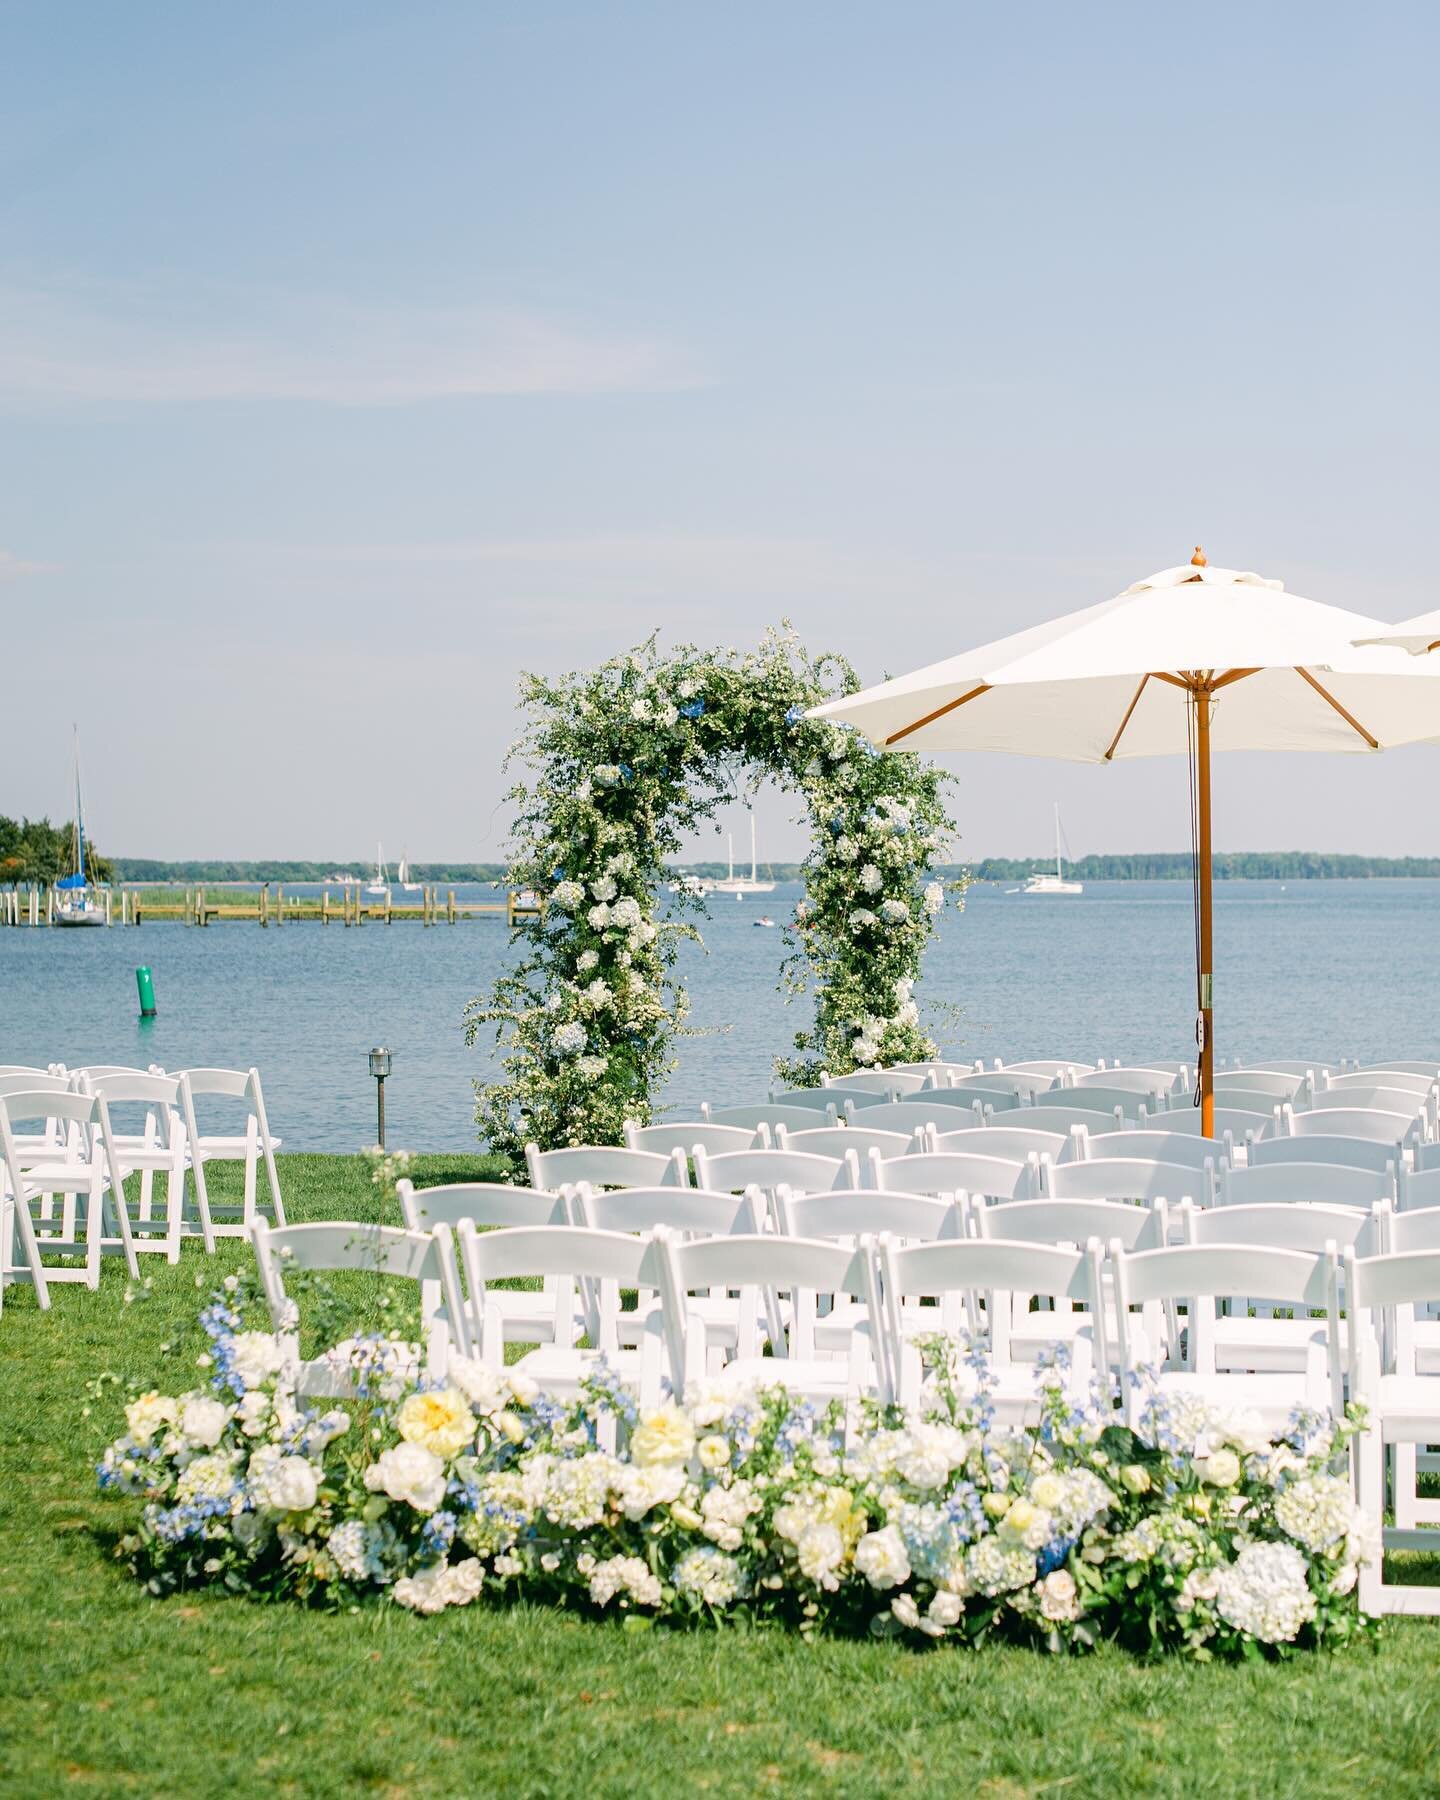 A breezy palette of dusty blues, greens and pops of sunny yellow for S&amp;P&rsquo;s ceremony on the Eastern Shore. A lush, textural floral arch by @sophiefelts created the perfect backdrop to frame the couple and those breathtaking water views! 

Ph